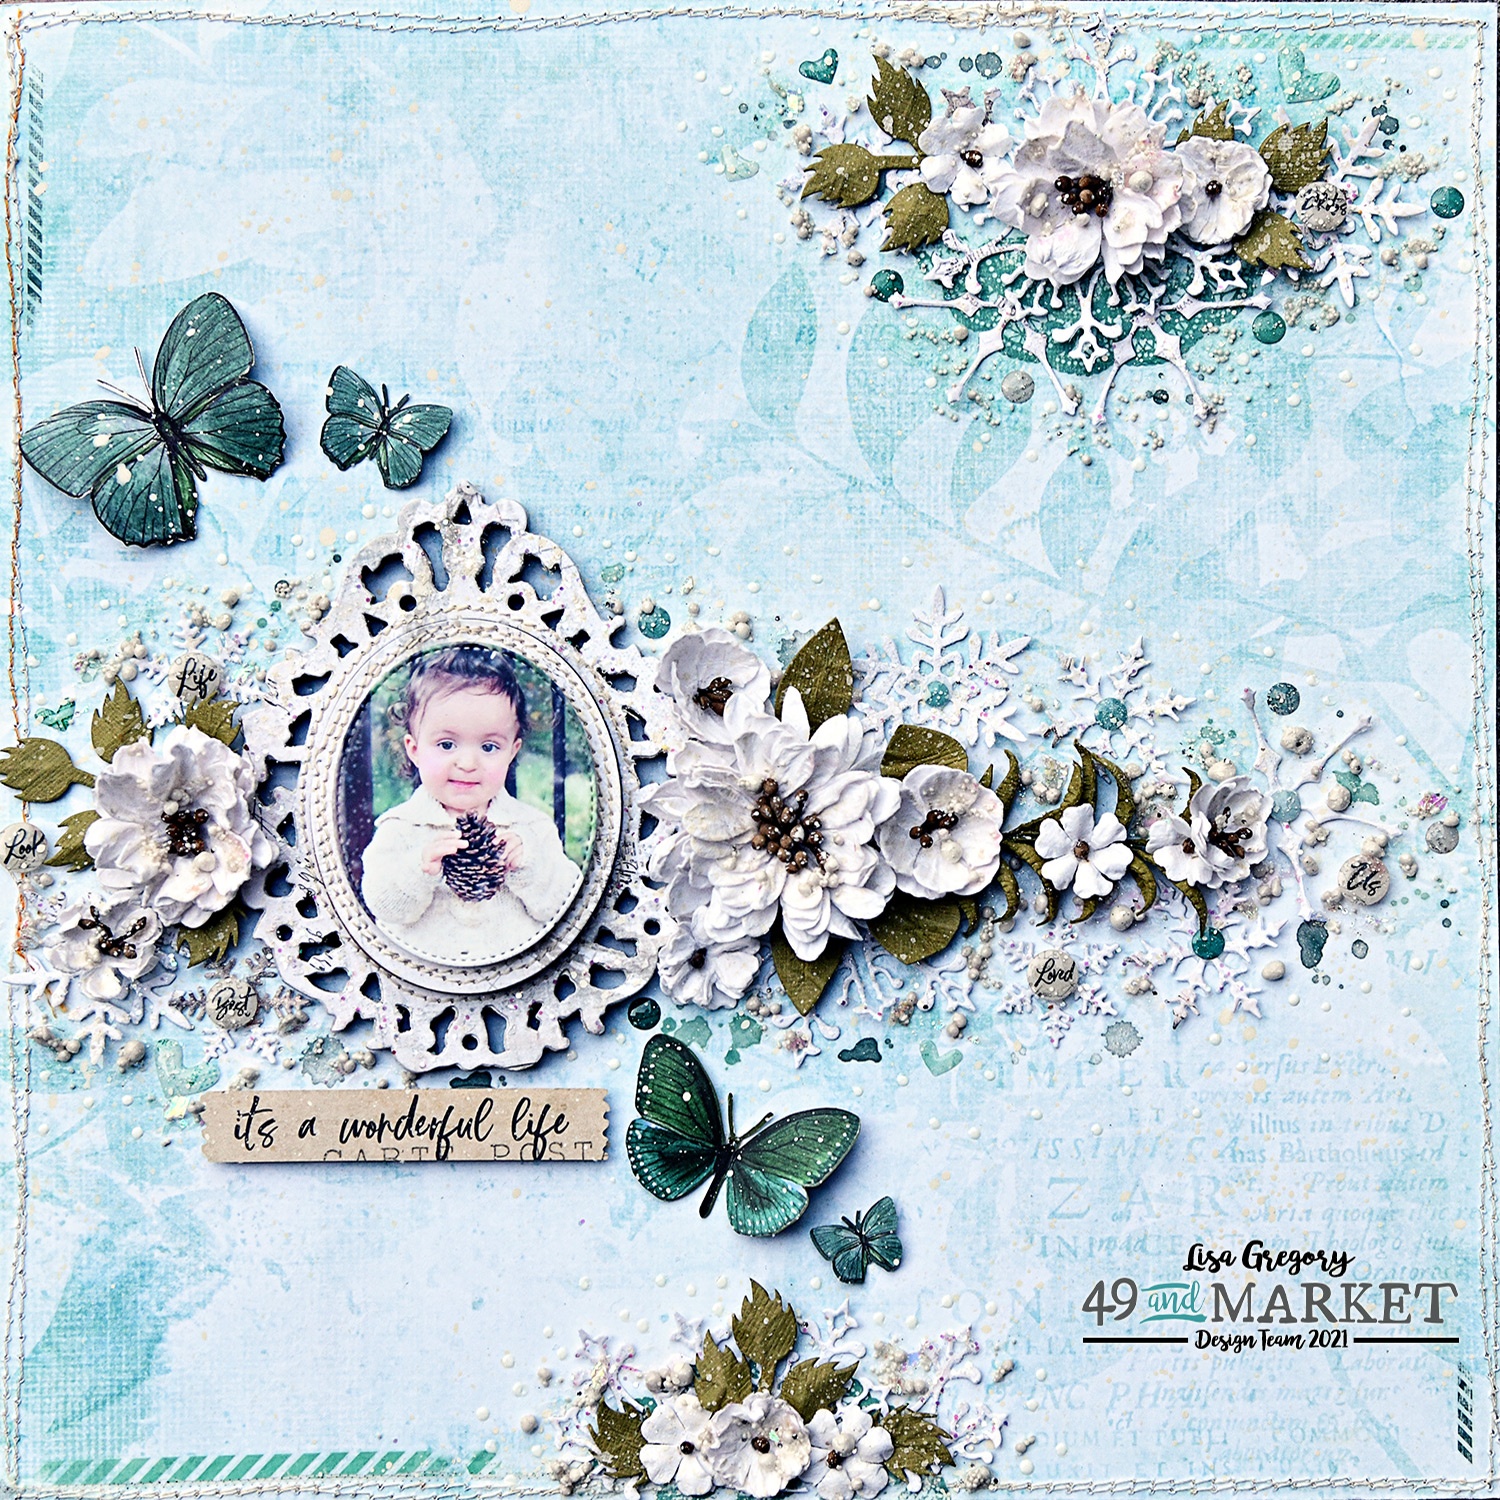 A wonderful life - Layout by Lisa Gregory